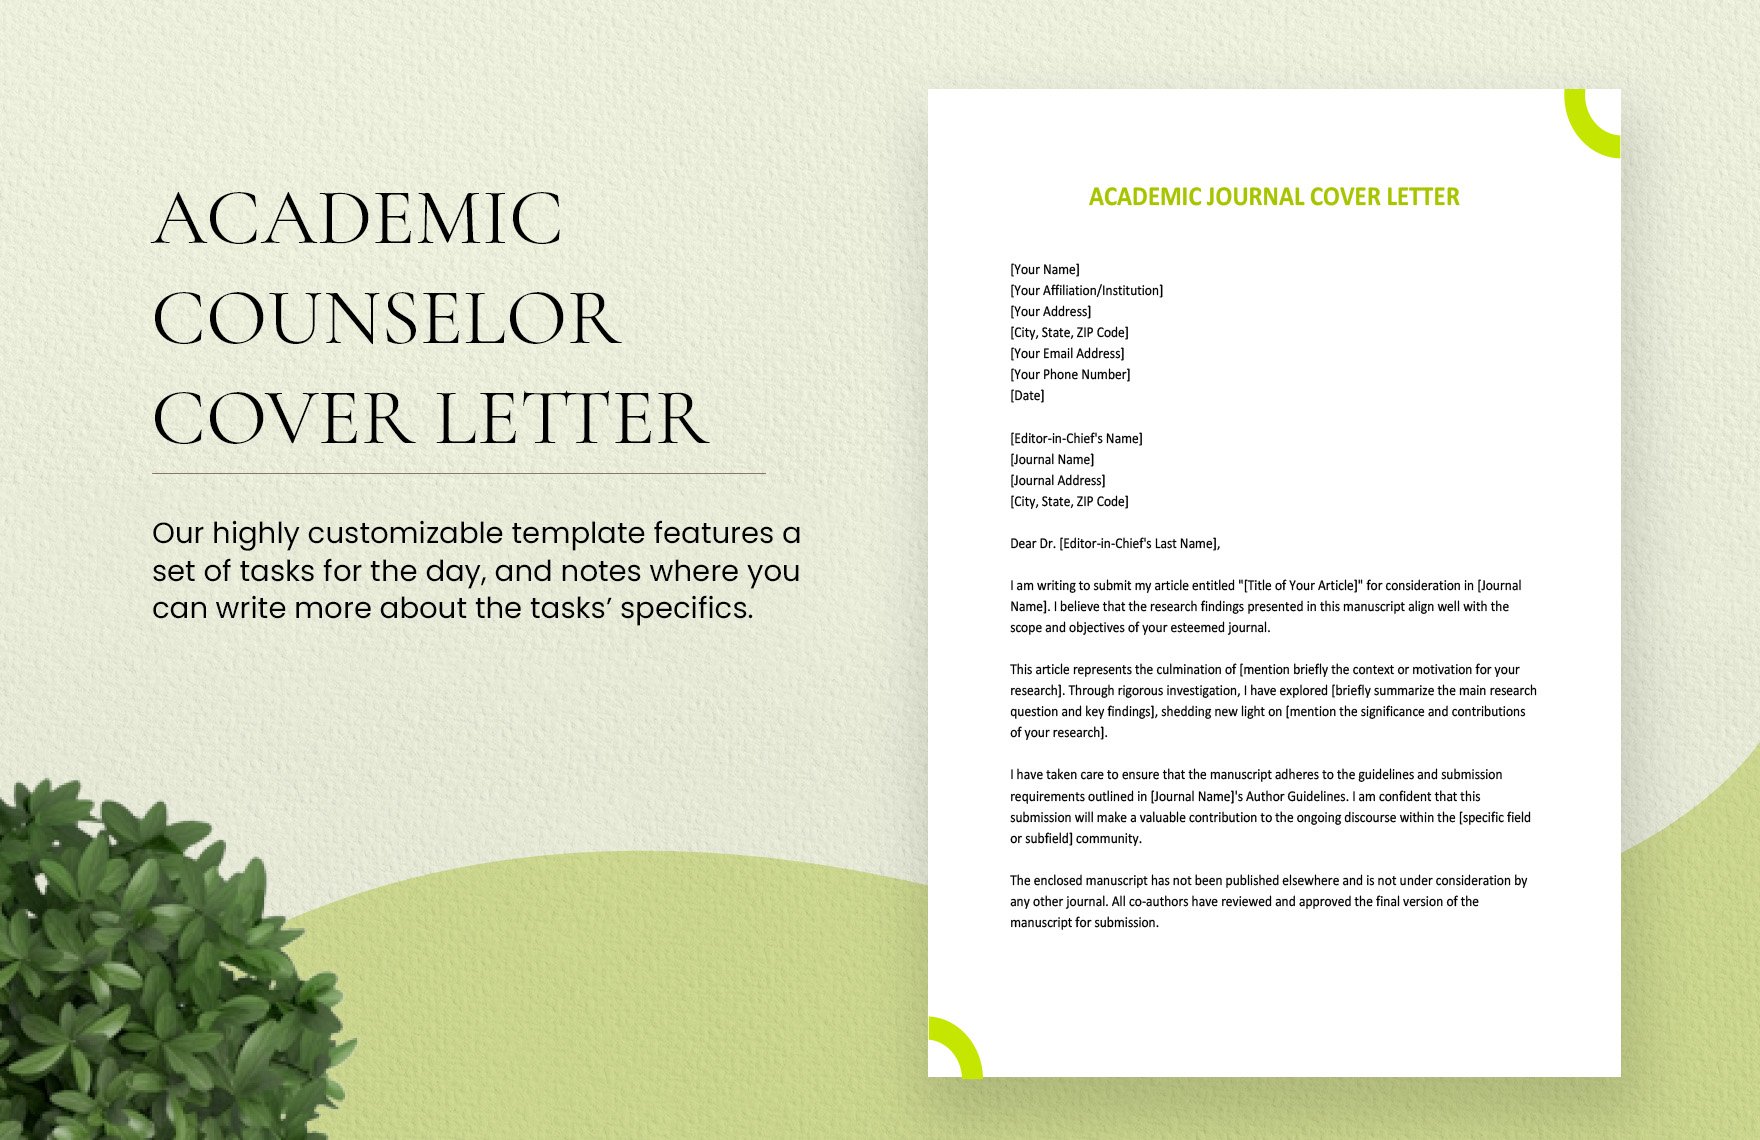 Free Academic Journal Cover Letter in Word, Google Docs, Apple Pages